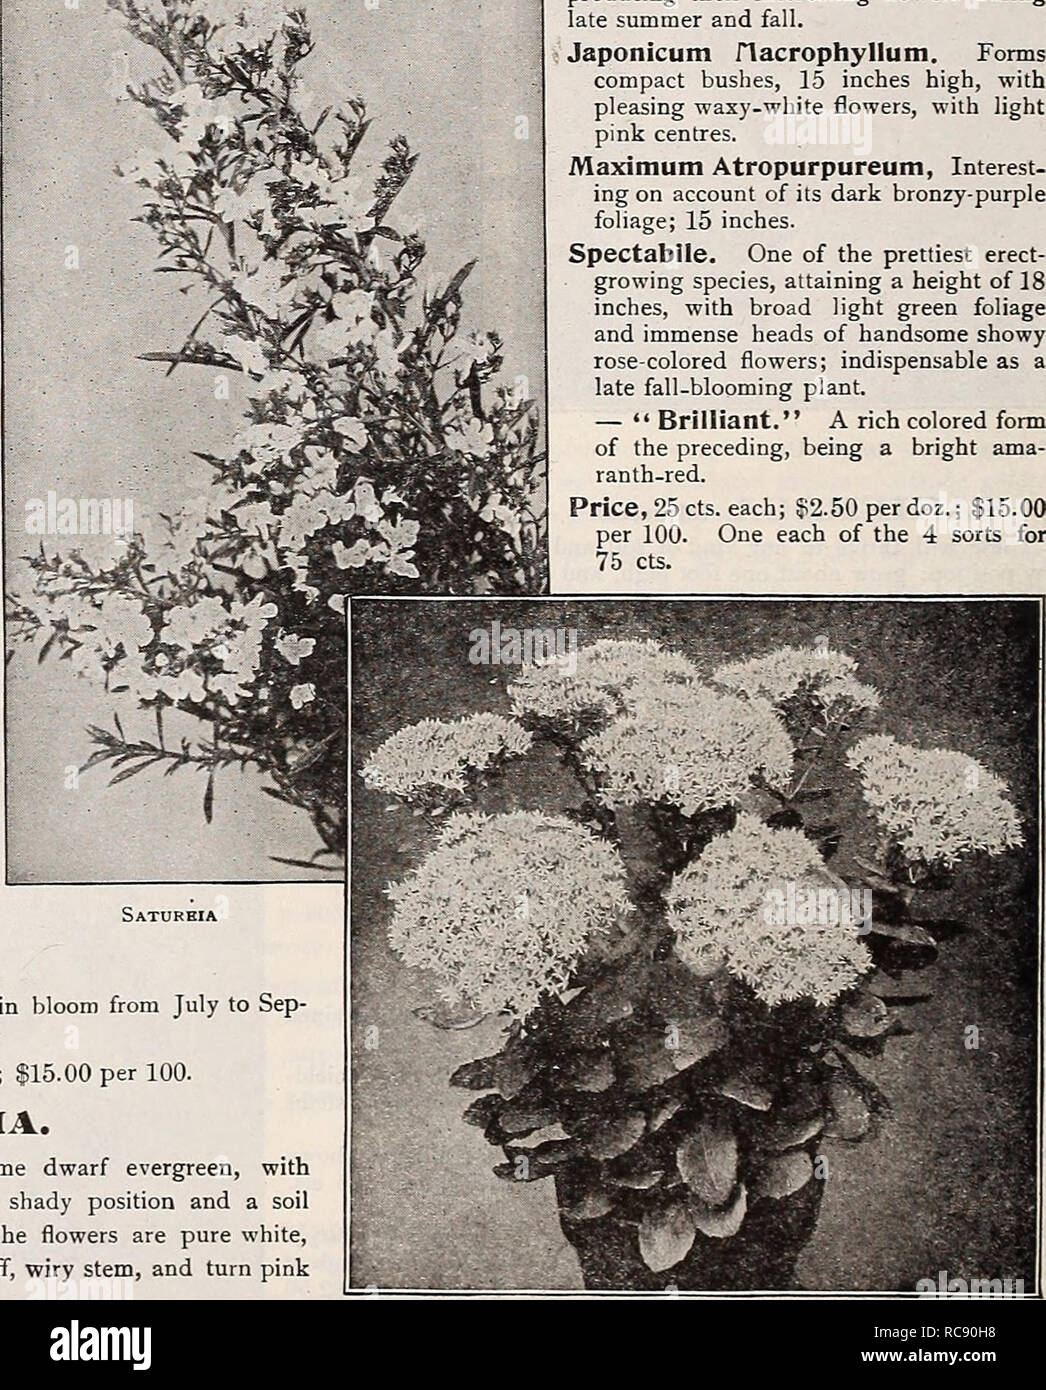 . Dreer's garden book 1917. Seeds Catalogs; Nursery stock Catalogs; Gardening Equipment and supplies Catalogs; Flowers Seeds Catalogs; Vegetables Seeds Catalogs; Fruit Seeds Catalogs. SEDUM (Stone-crop). DWARF VARIETIES. Suitable for the rockery, carpet bedding, covering of graves, etc. Acre ( Golden Afoss). Much used for covering graves; foliage green; flowers bright yellow. Album. Green foliage, white flowers. Ewers!. Pink flowers; August and September. Kamtschaticum. Deep green foliage; yellow flowers in June; 8 inches. Lydium Qlaucum. A neat variety, with glaucous foliage. Middendorfianum. Stock Photo